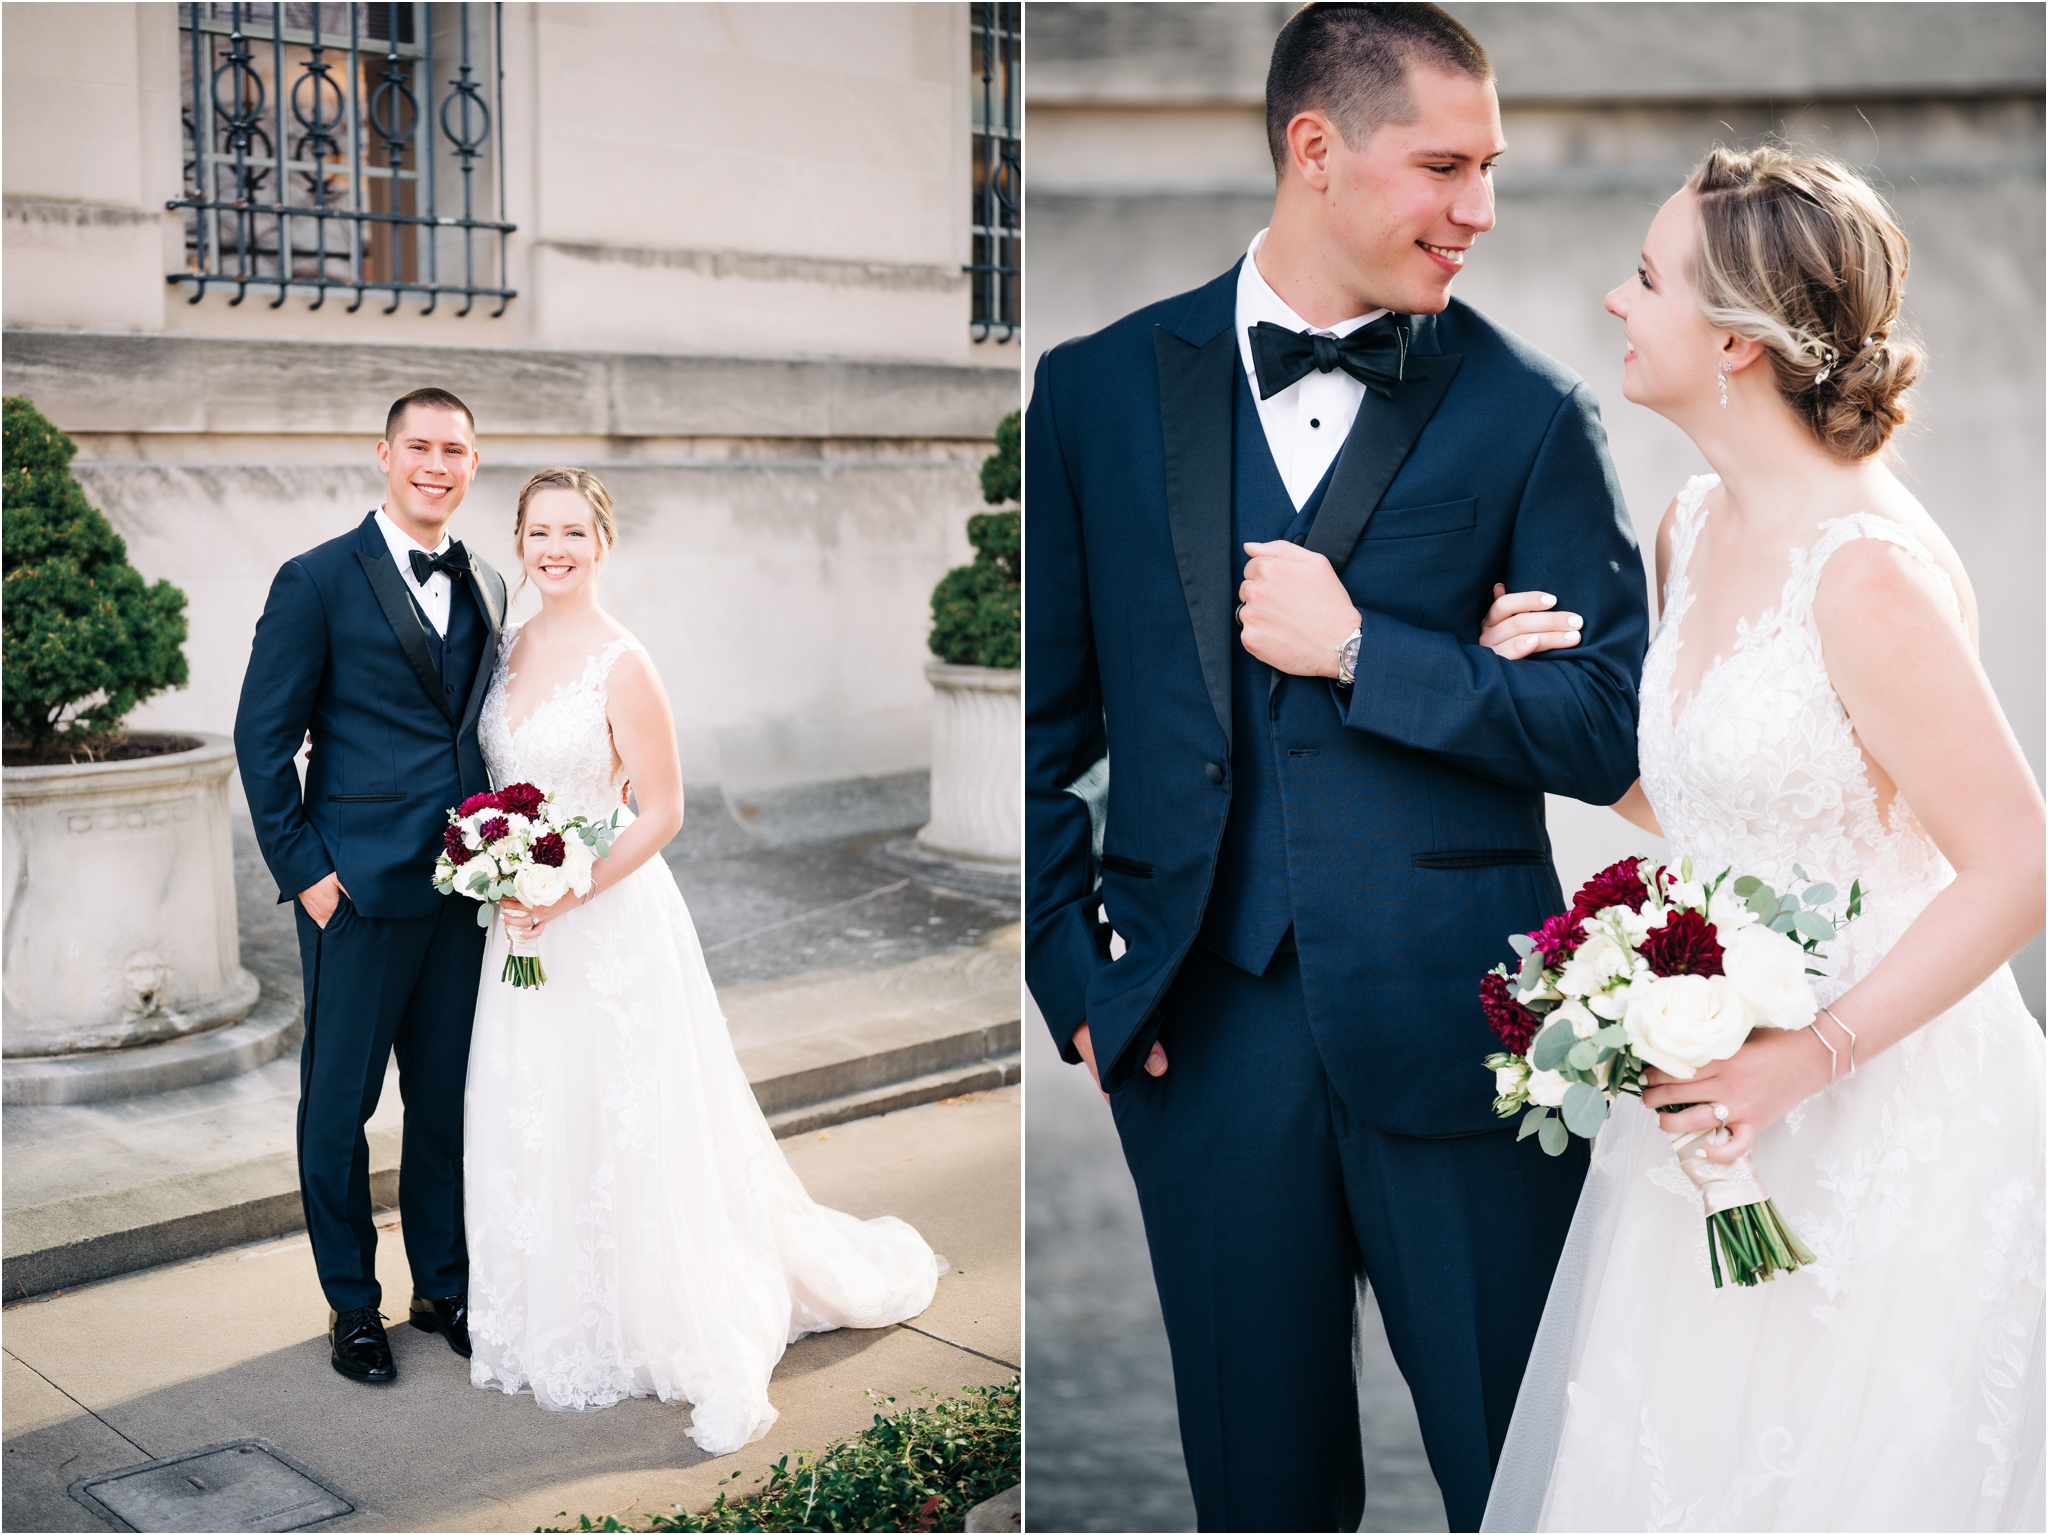 Bride and Groom Photos in the Gardens at the Indianapolis Central Library